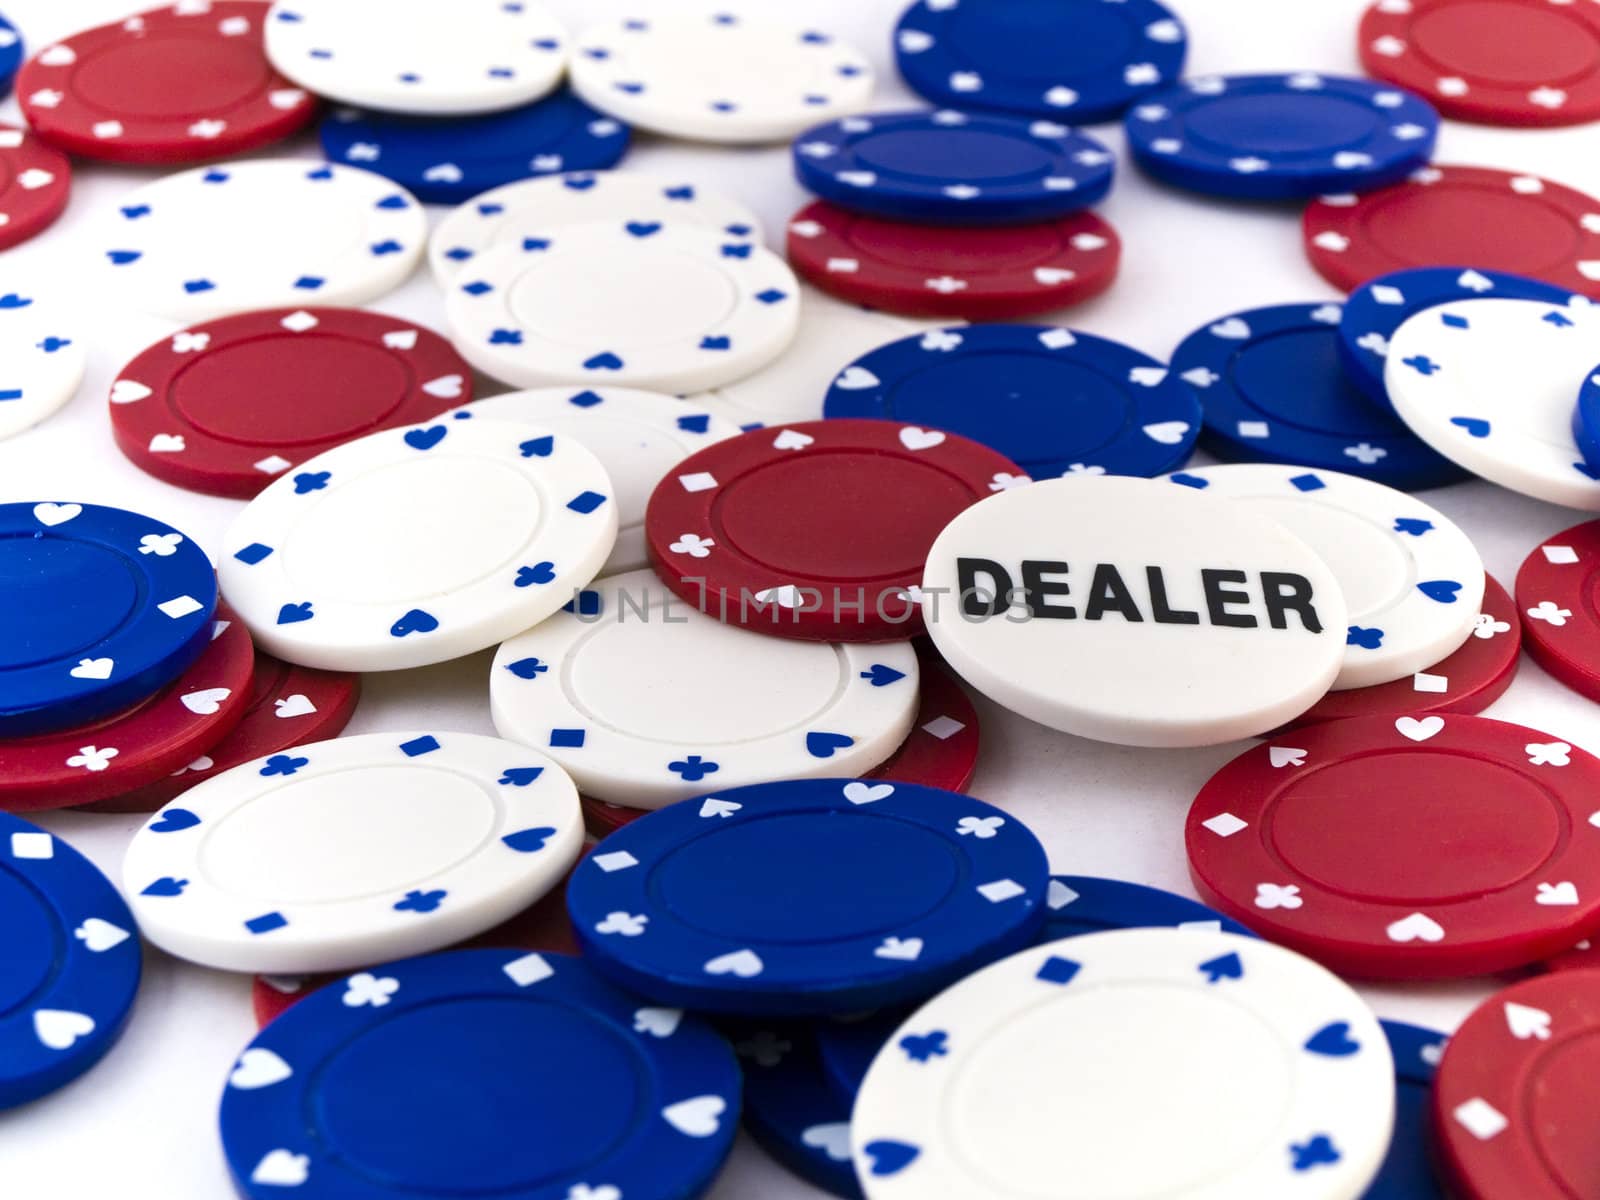 Red White and Blue Poker Chips and Dealer on White Background by bobbigmac